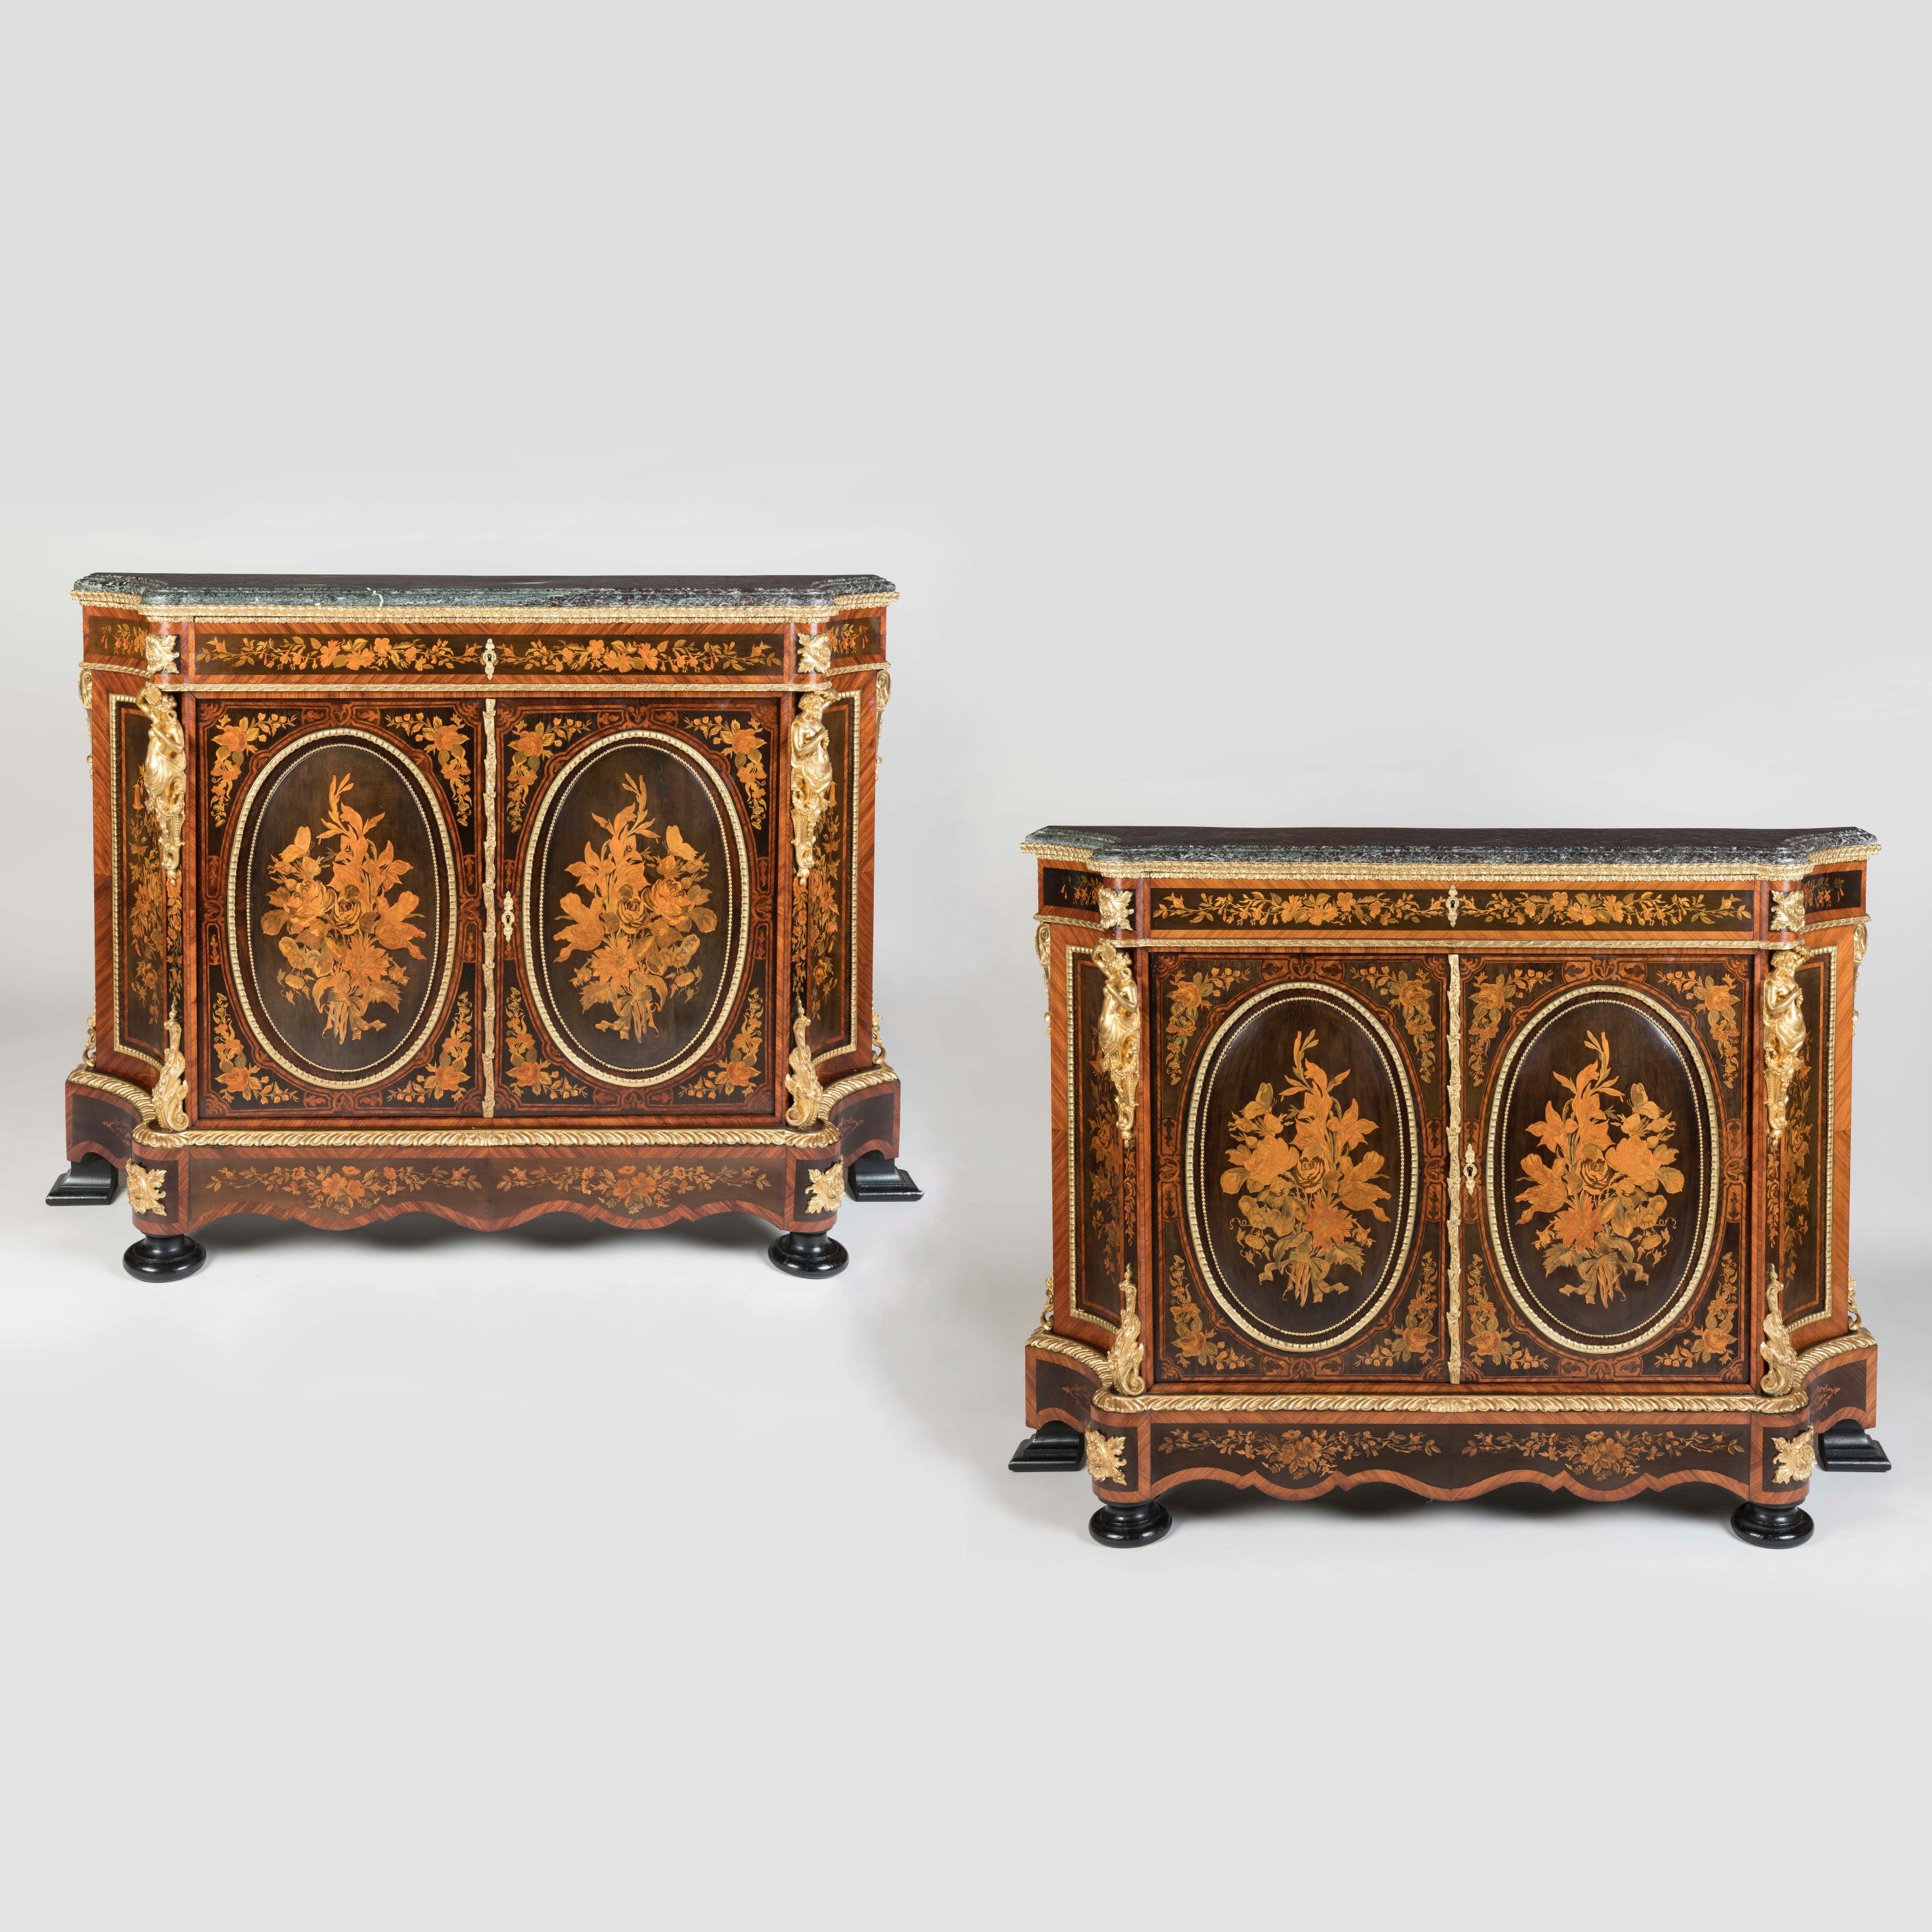 A Striking Pair of Napoleon III  Meubles d'Appui
The Marquetry attributed to Joseph Cremer

Constructed from tulipwood with inlay of various specimen woods including harewood, fruitwood, ashwood and boxwood, ormolu mounted throughout, the shaped